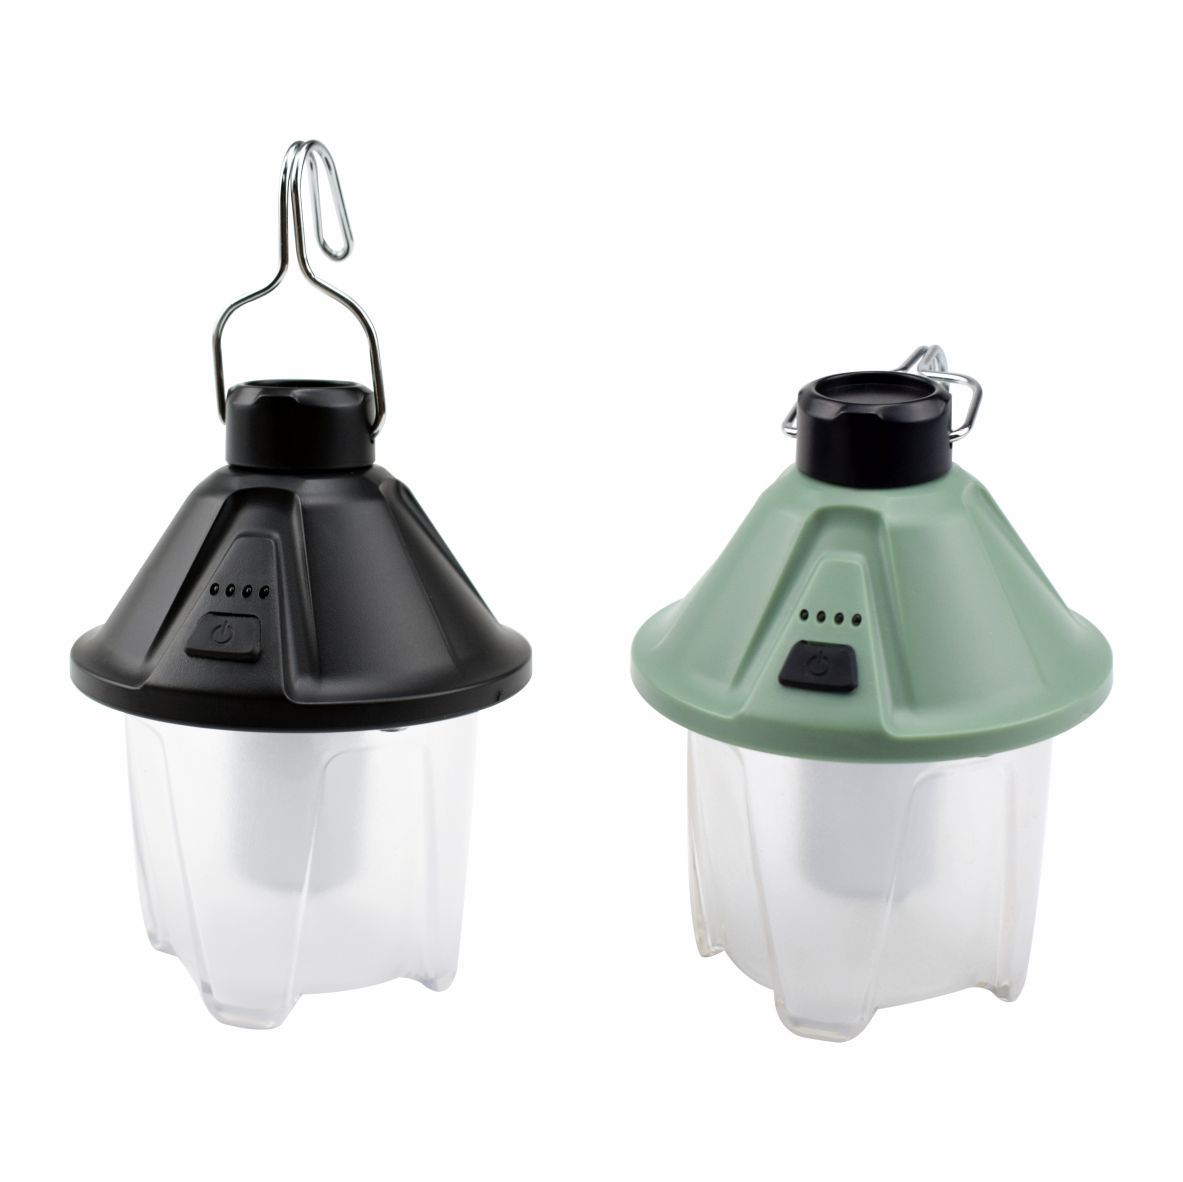 L804 Dry Cell/Rechargeable Retro Camping Lantern